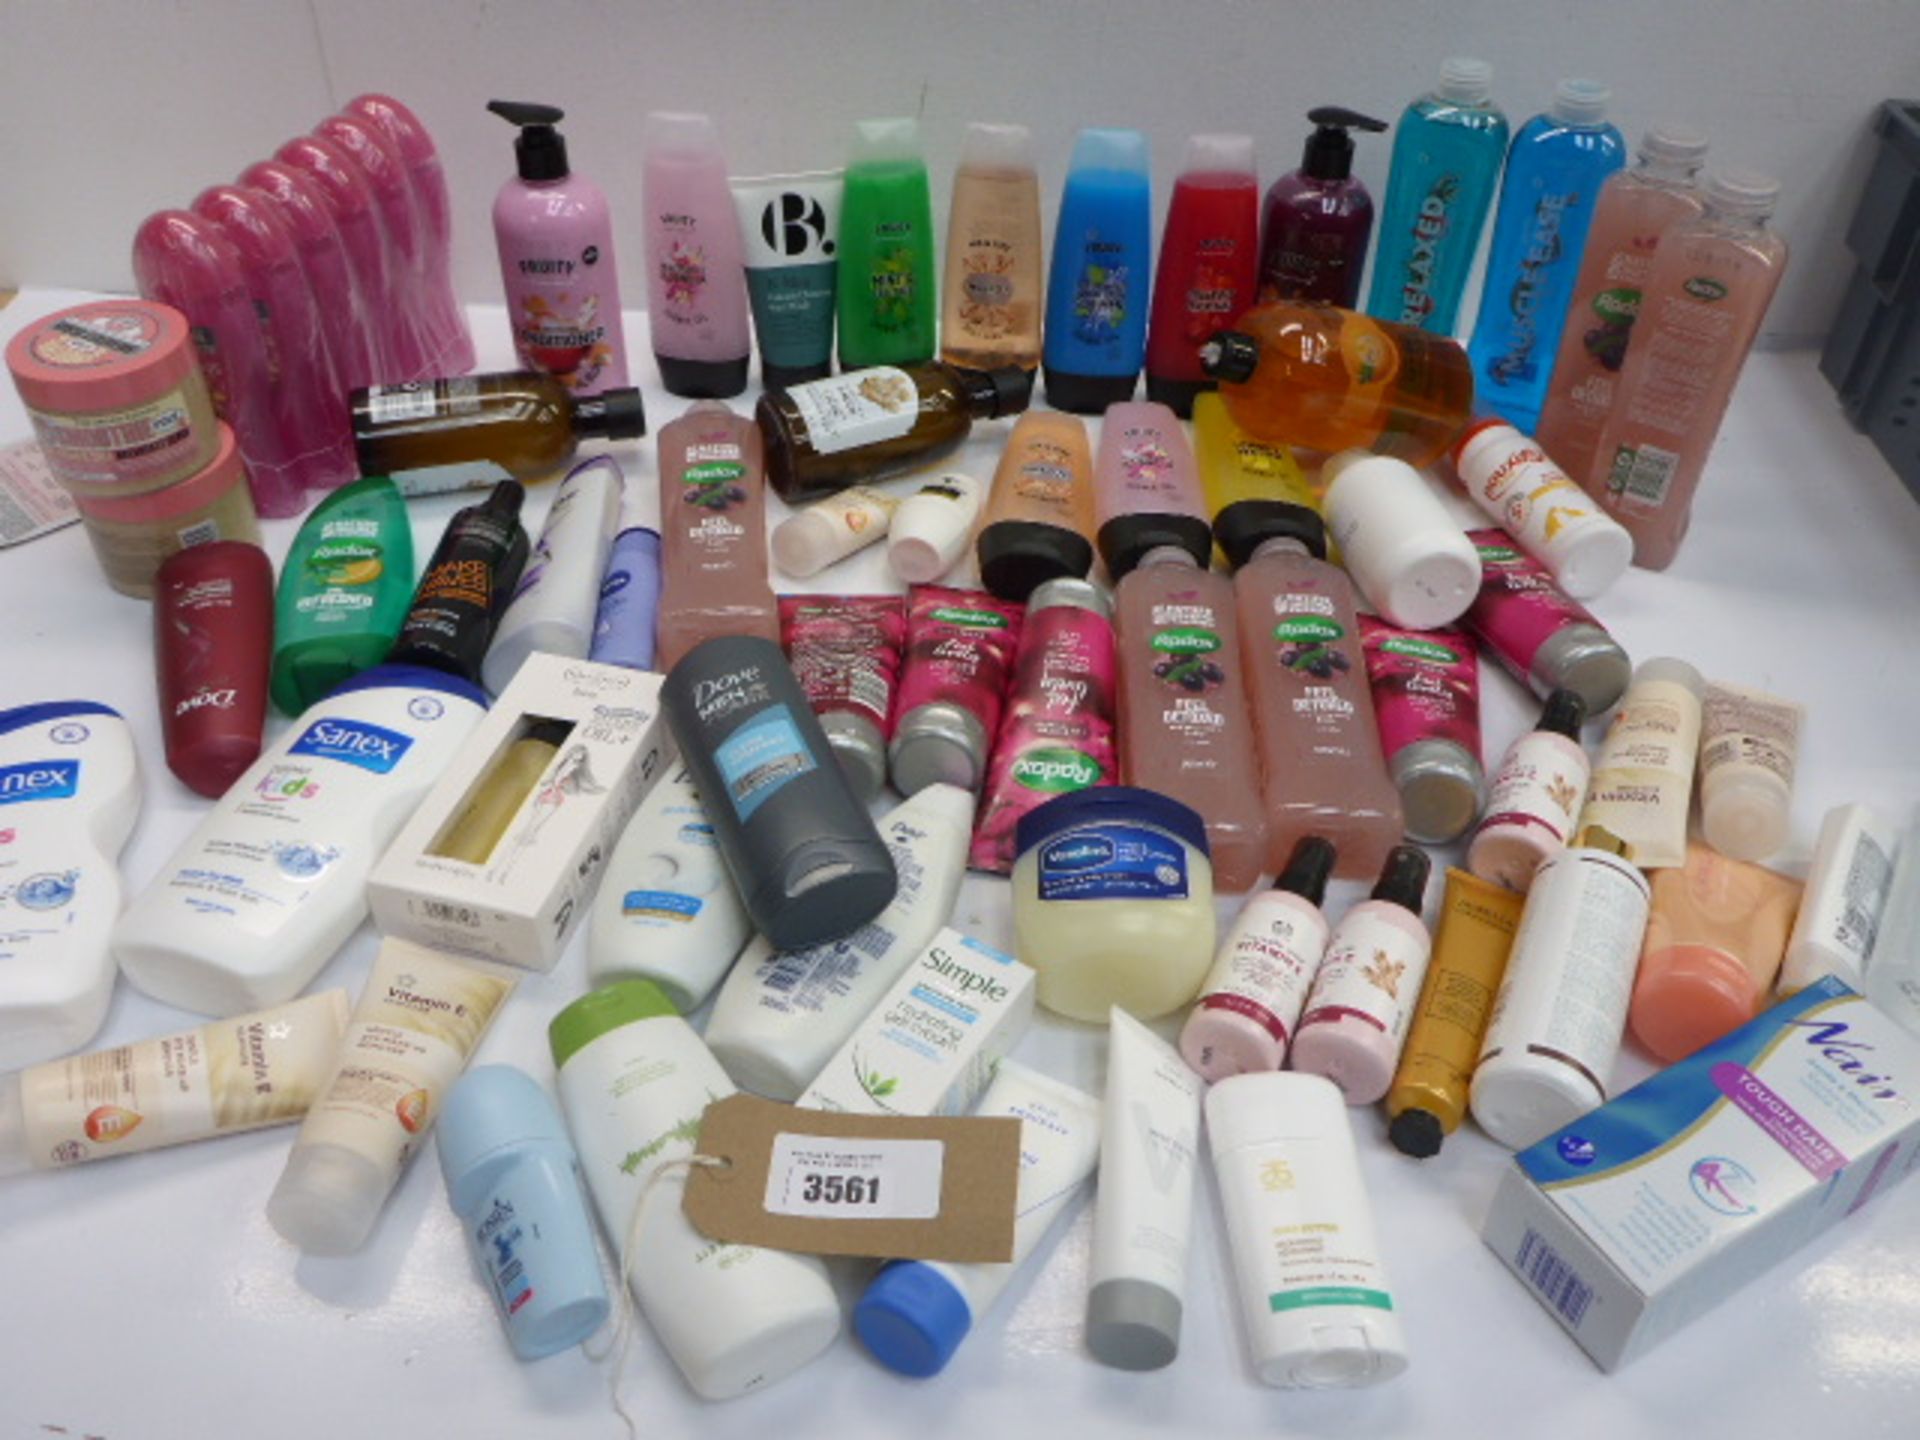 Large bag of toiletries includning shampoo, conditioner, body wash, makeup remover, deodorant,